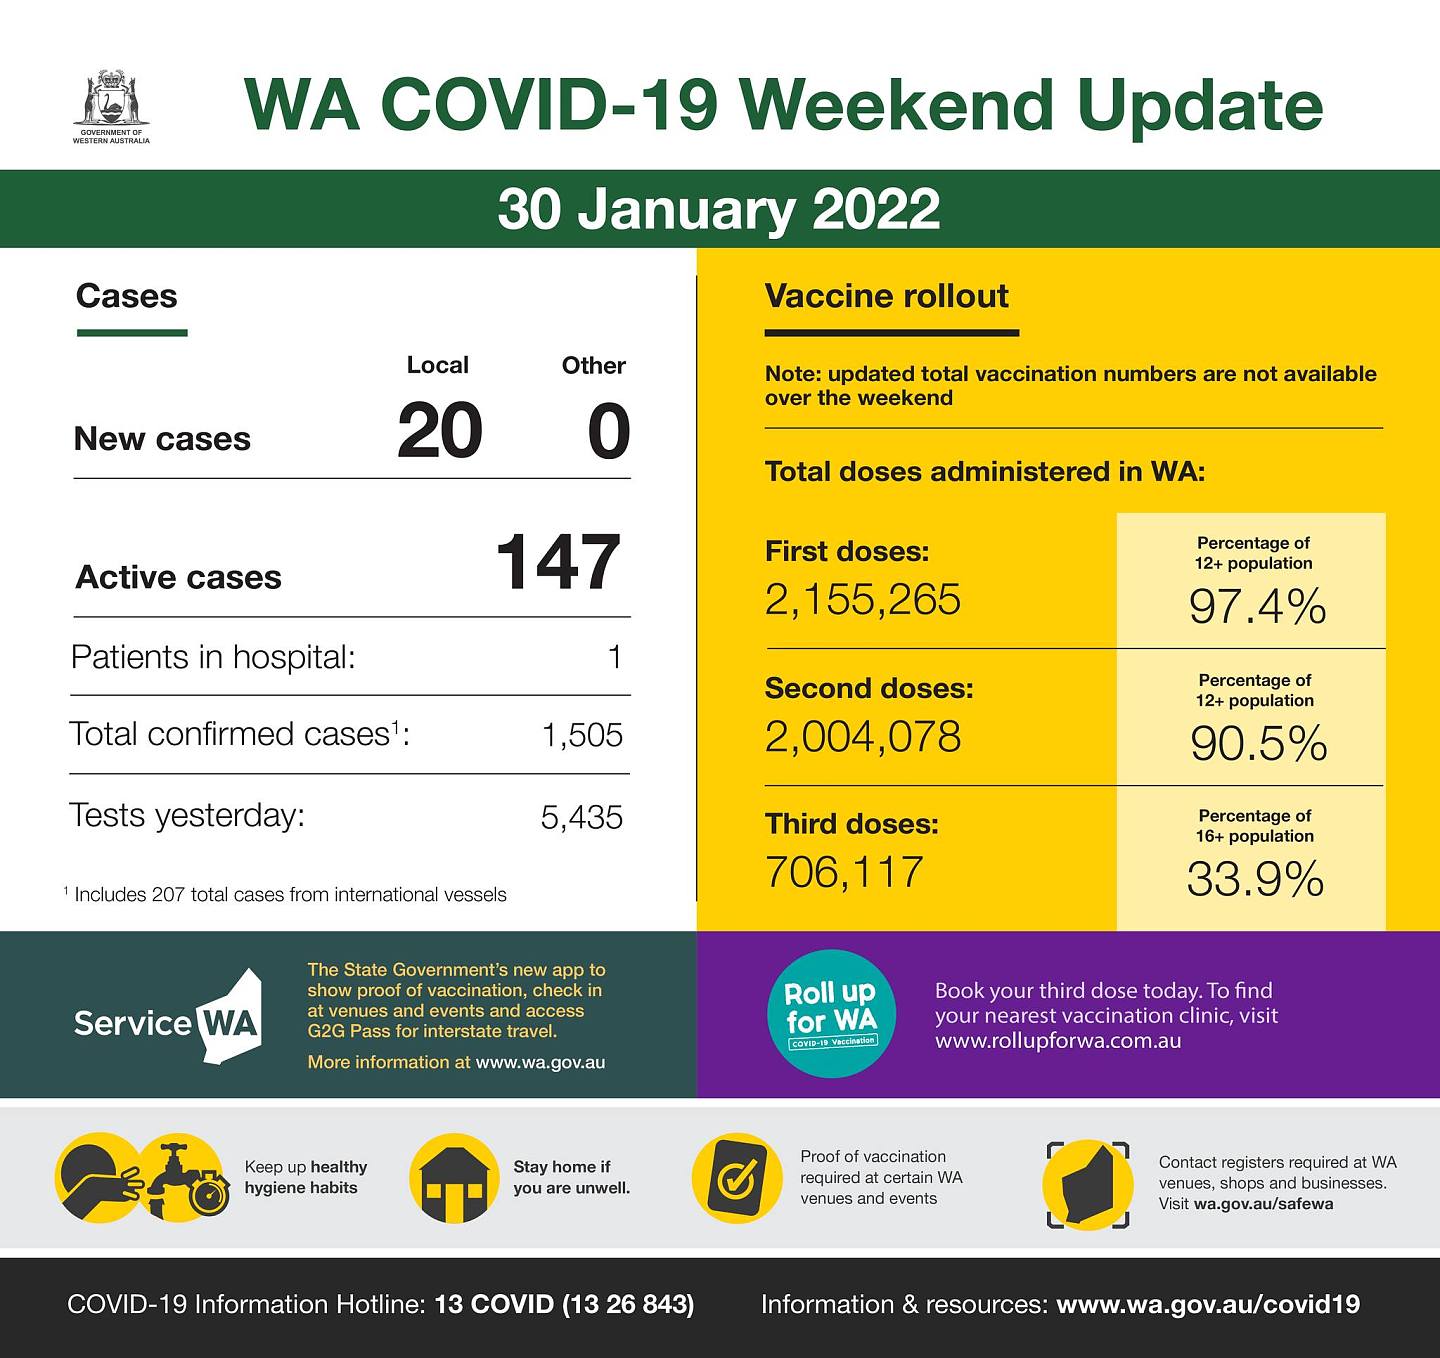 May be an image of text that says 'ันั่น WA COVID-19 Weekend Update Cases 30 January 2022 New cases Vaccine rollout Local 20 Other 0 Note: updated total vaccination numbers are over the weekend Active cases Total doses administered in WA: Patients in hospital: 147 First doses: 2,155,265 Total confirmed cases1: Percentage of 1,505 Tosts yesterday: Second doses: 2,004,078 cases 5,435 Percentage population 90.5% useads Third doses: 706,117 Service WA Percentage population 33.9% Roll for WA Keepu hygien healthy abita rthird today. Tofind nearestvaccination λπίς, visit www.rallupforve.com.au Stay ycu unwell. หตางสรอ 달시크드 COVID- 19 Information Hotline: 13 COVID (13 26 843) a' ... Information & resources: www.wa.gov.au/covid19'